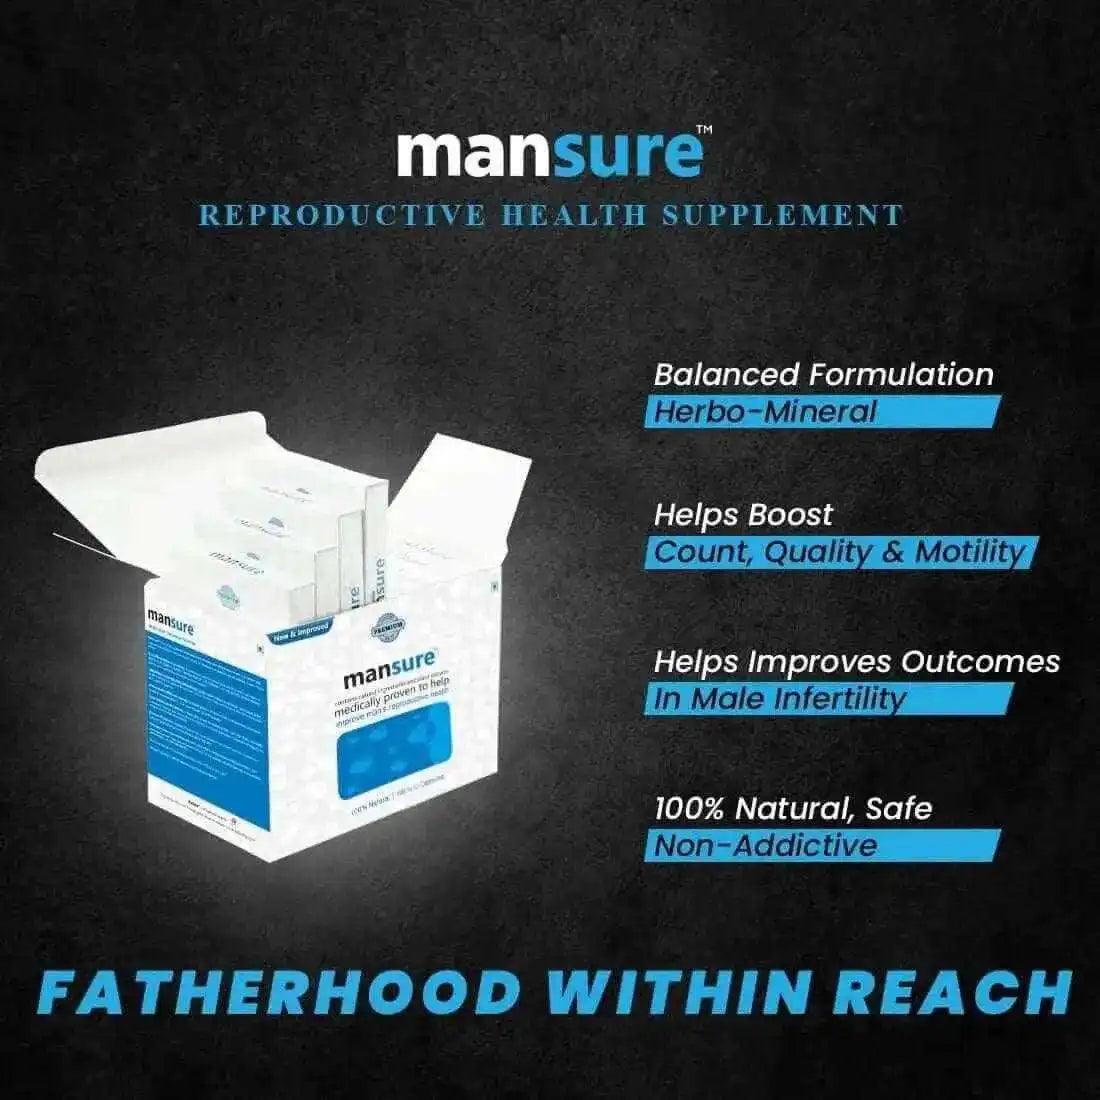 ManSure Male Reproductive Health Supplement is Natural, Safe, Effective and Non-Addictive - everteen-neud.com